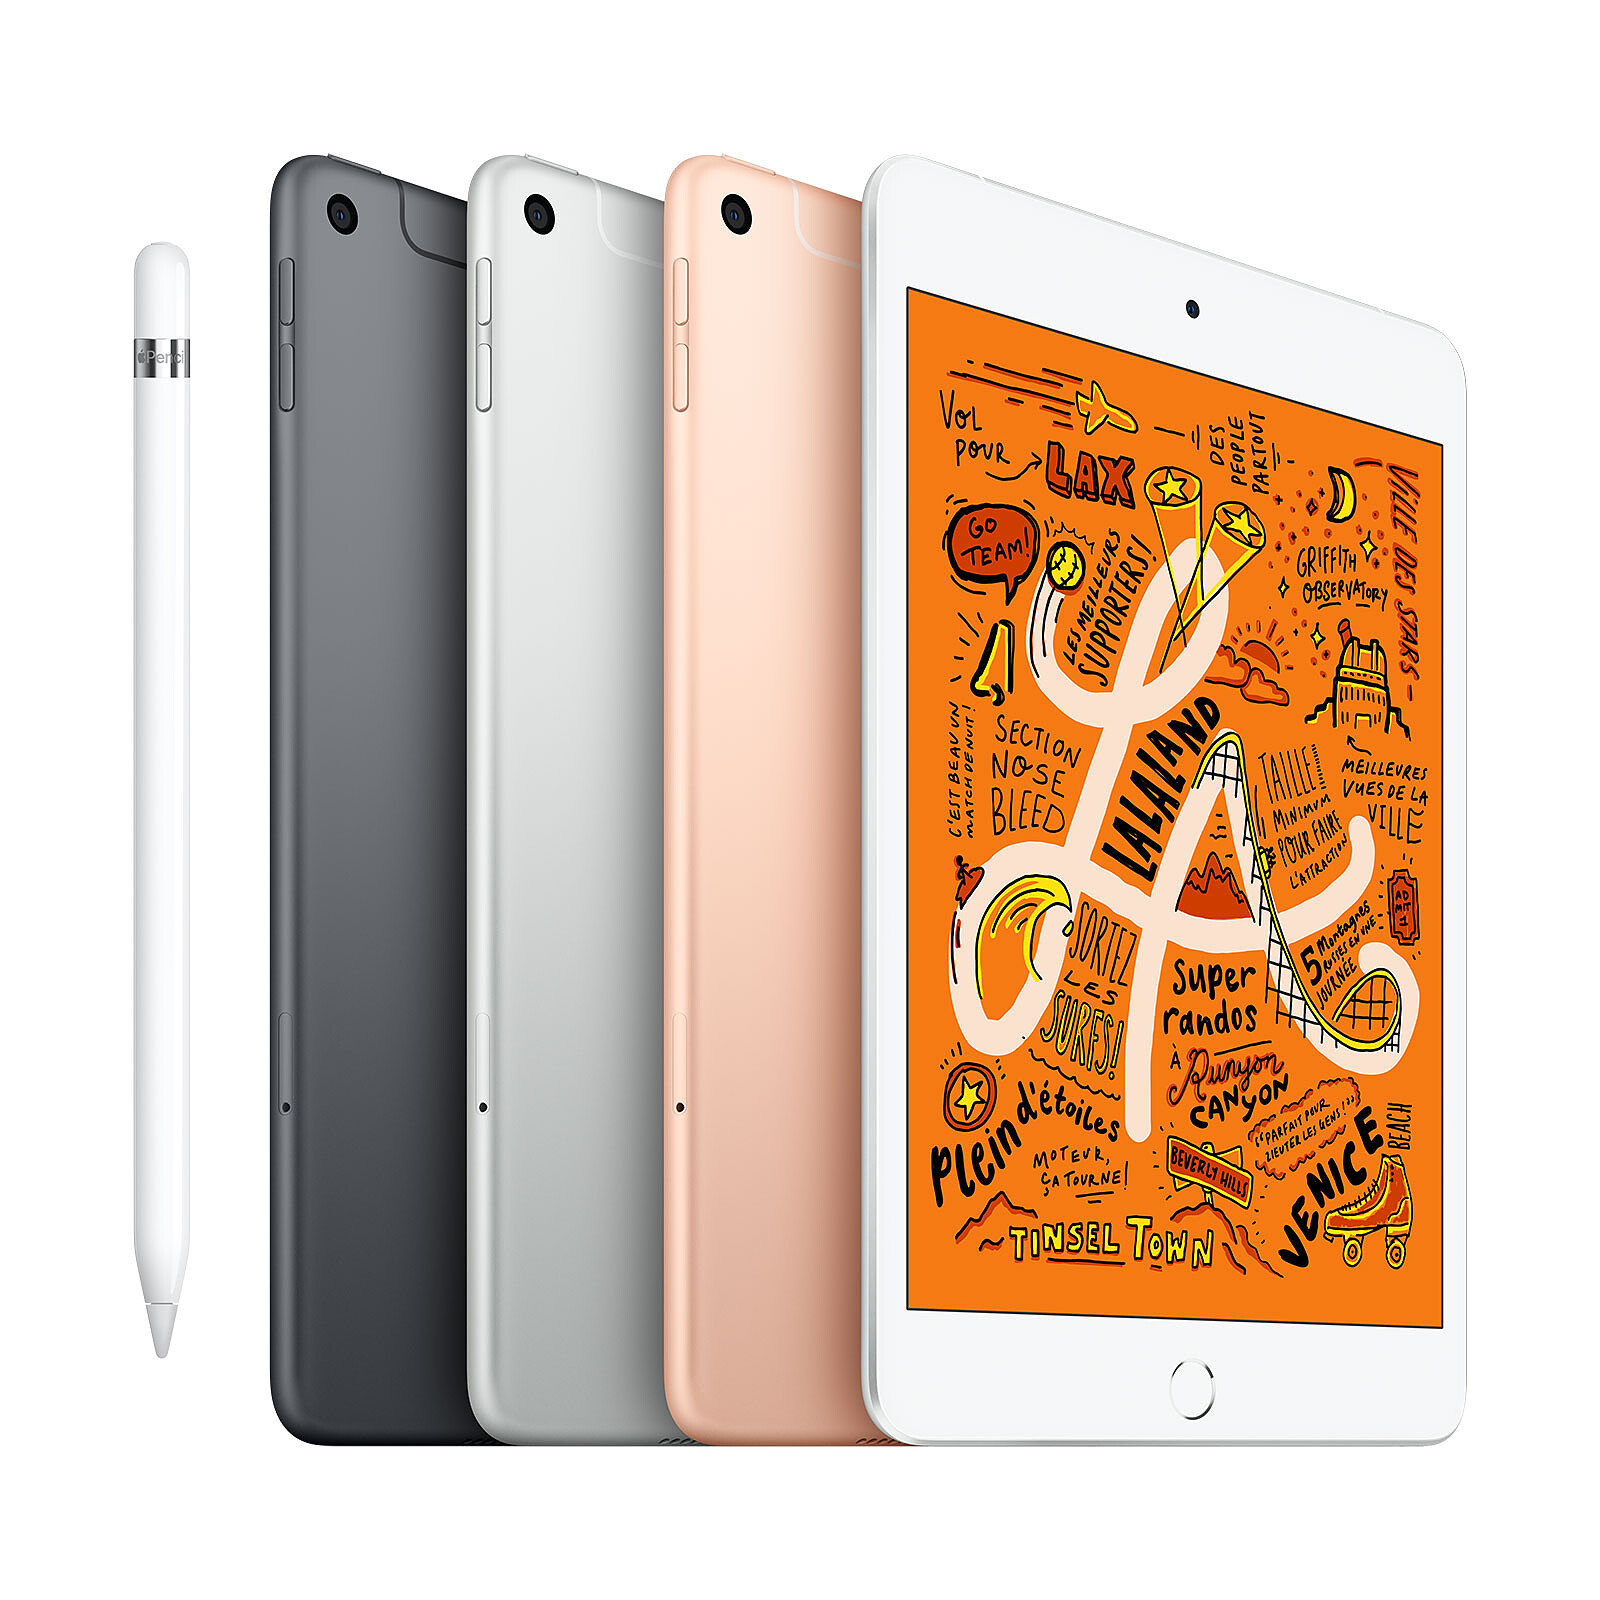 PC/タブレット タブレット Apple iPad mini 5 Wi-Fi Cellular 256GB Space Grey - Tablet 